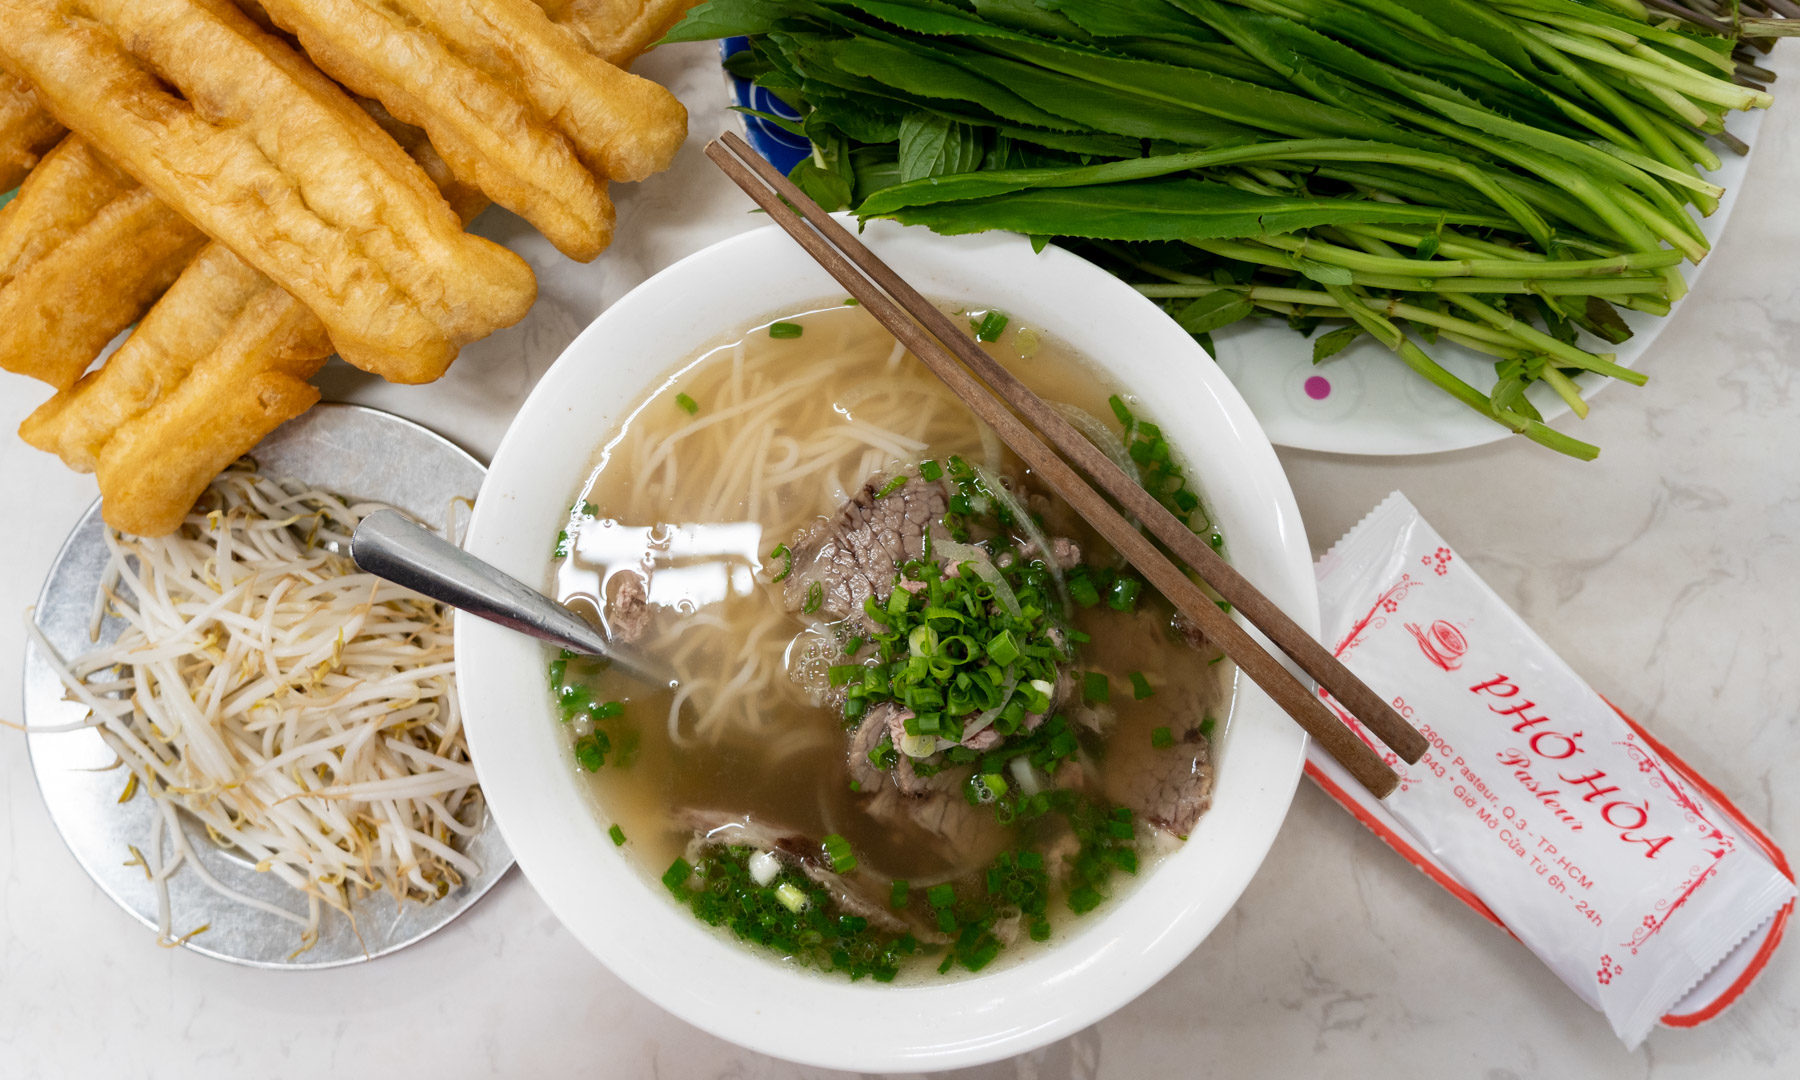 Where to Find the Best Pho in Ho Chi Minh City (Saigon)